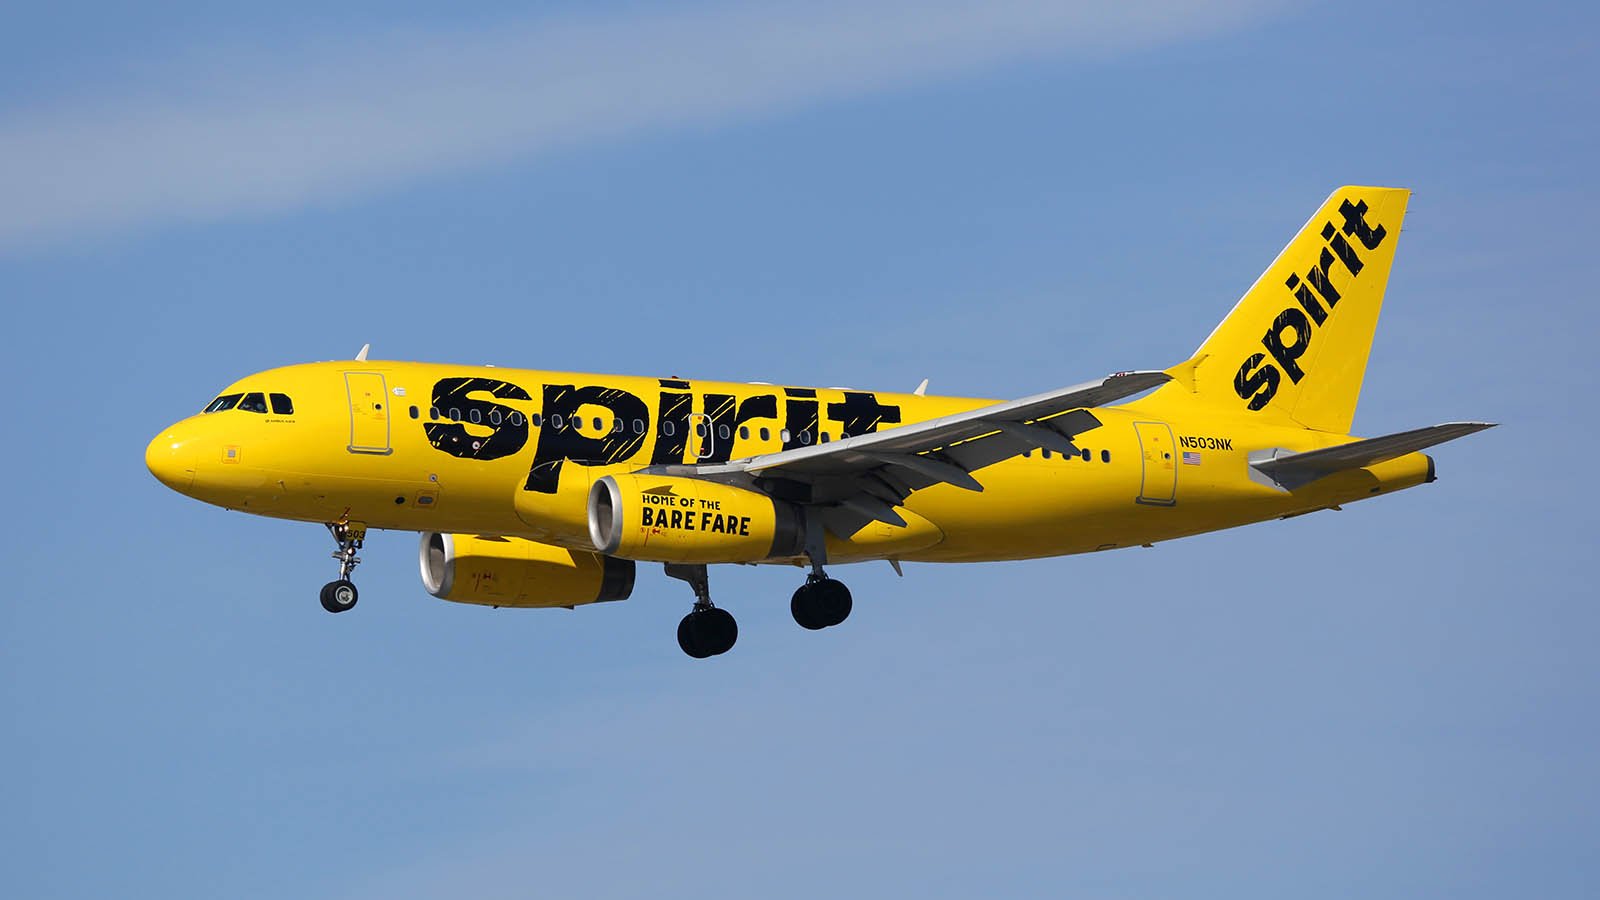 A yellow, Spirit Airlines (SAVE) branded airplane flying in the air